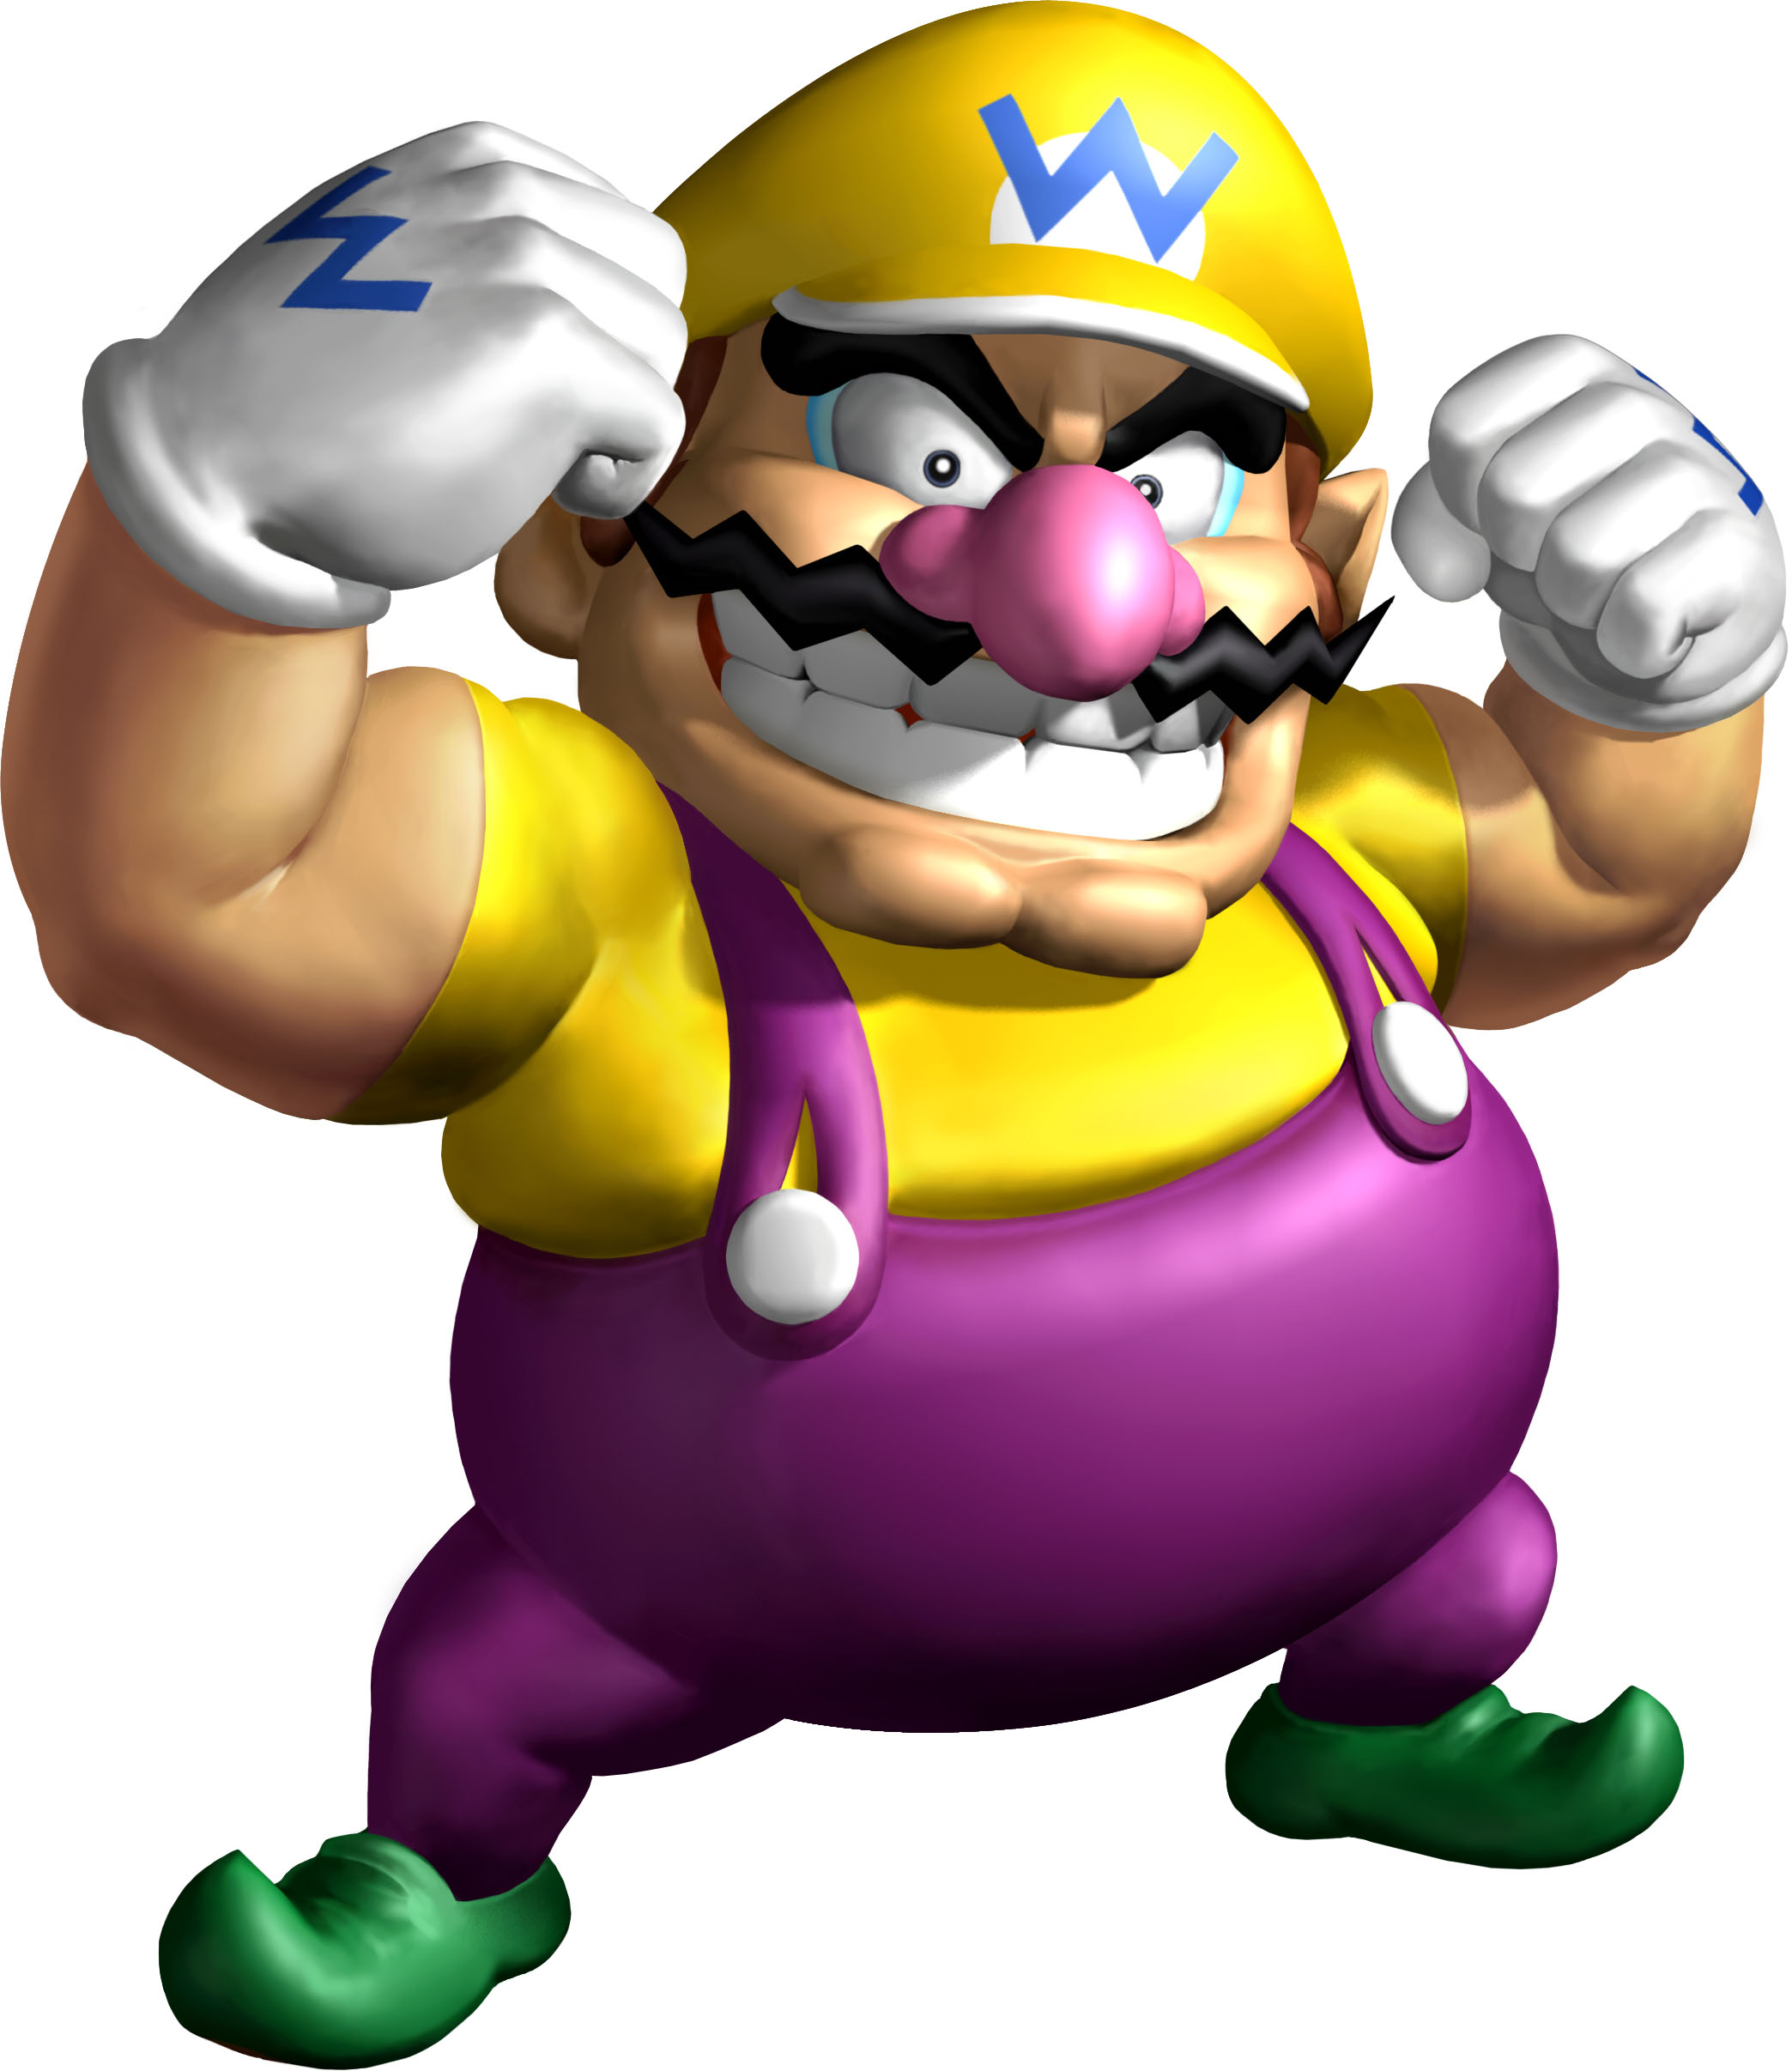 Wario from the Mario Bros. Series and many other Nintendo Games - Game Art. Cosplay2088 x 2413